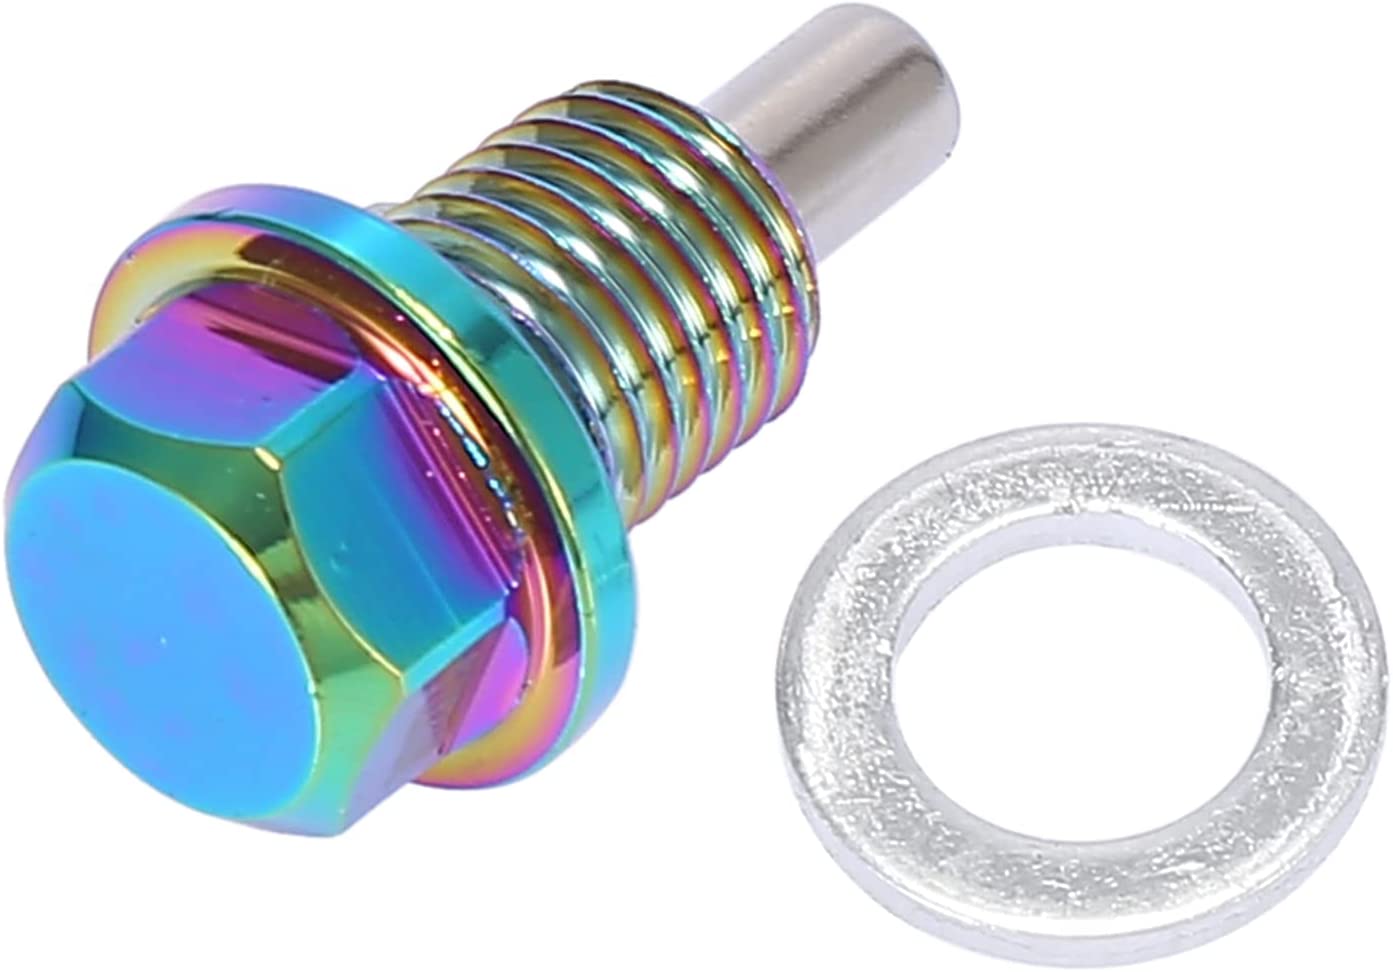 M12x1.5 Multicolor Magnetic Oil Drain Plug with Gaskets for Universal Car